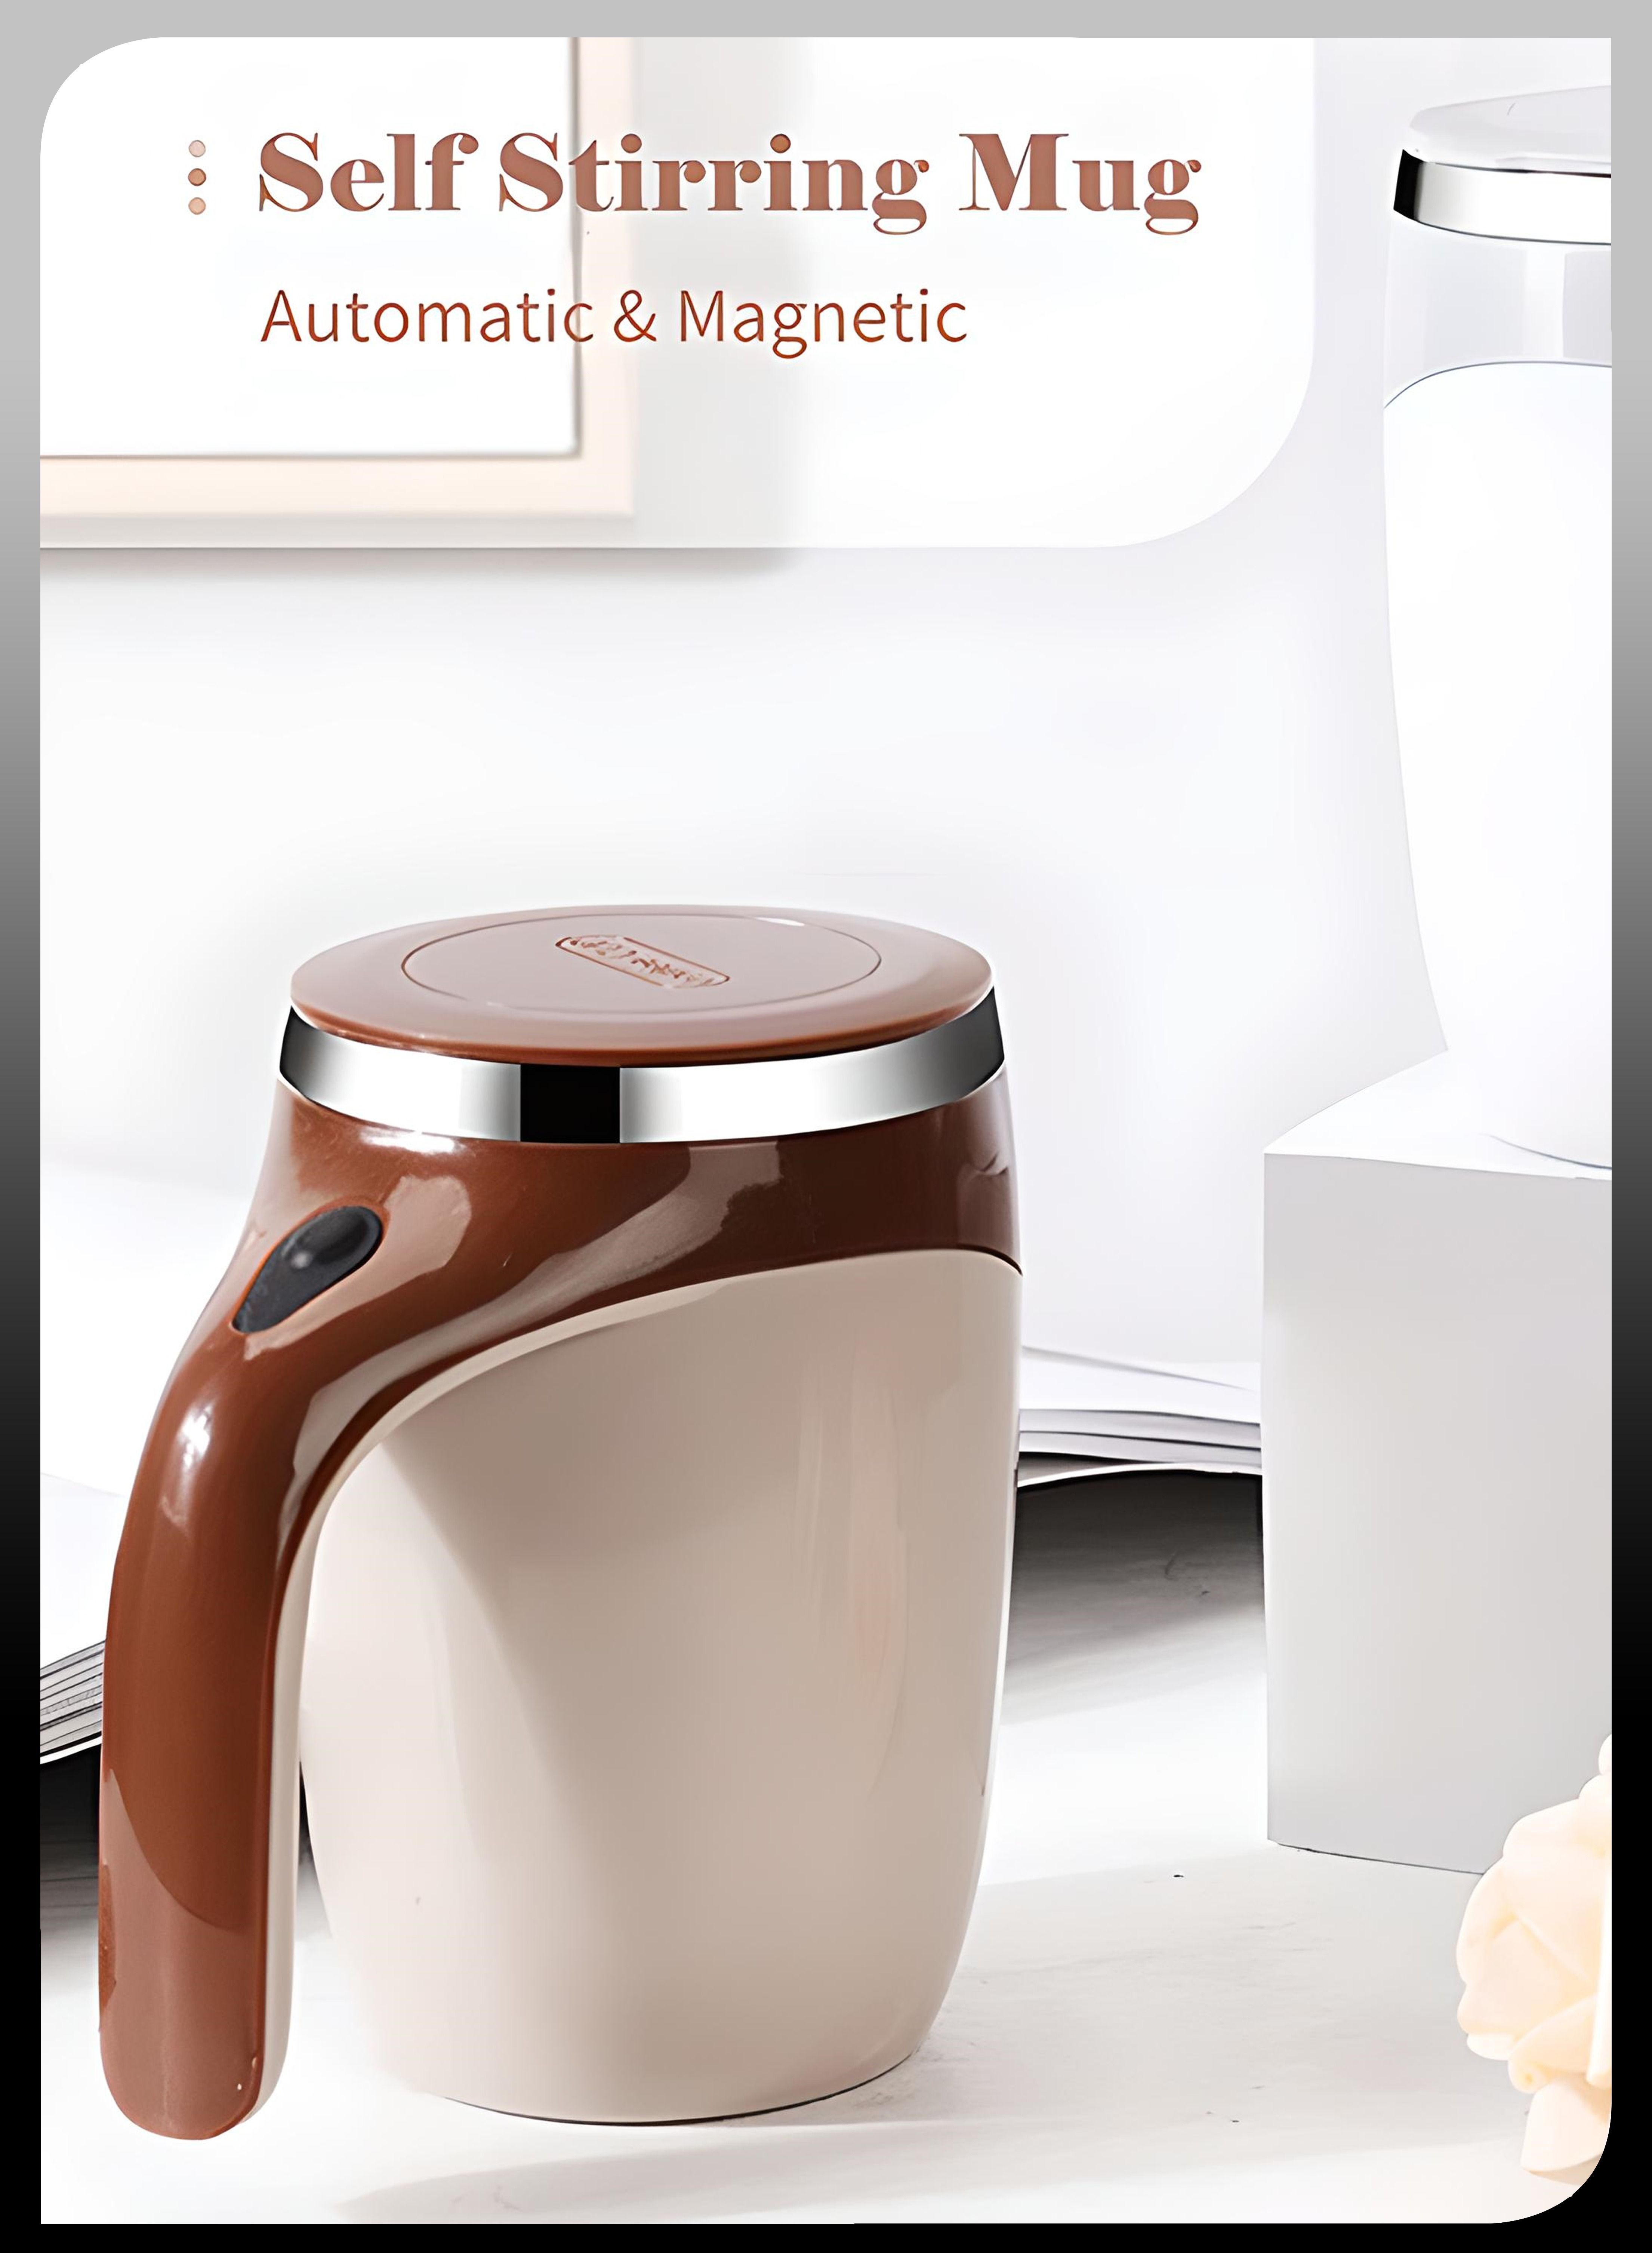 380mL Electric Magnetic Self Stirring Mug With Lid Automatic Rotating Mixing Coffee Cup Stainless Steel For Beverages Milk Hot Chocolate For Home Office Travel 